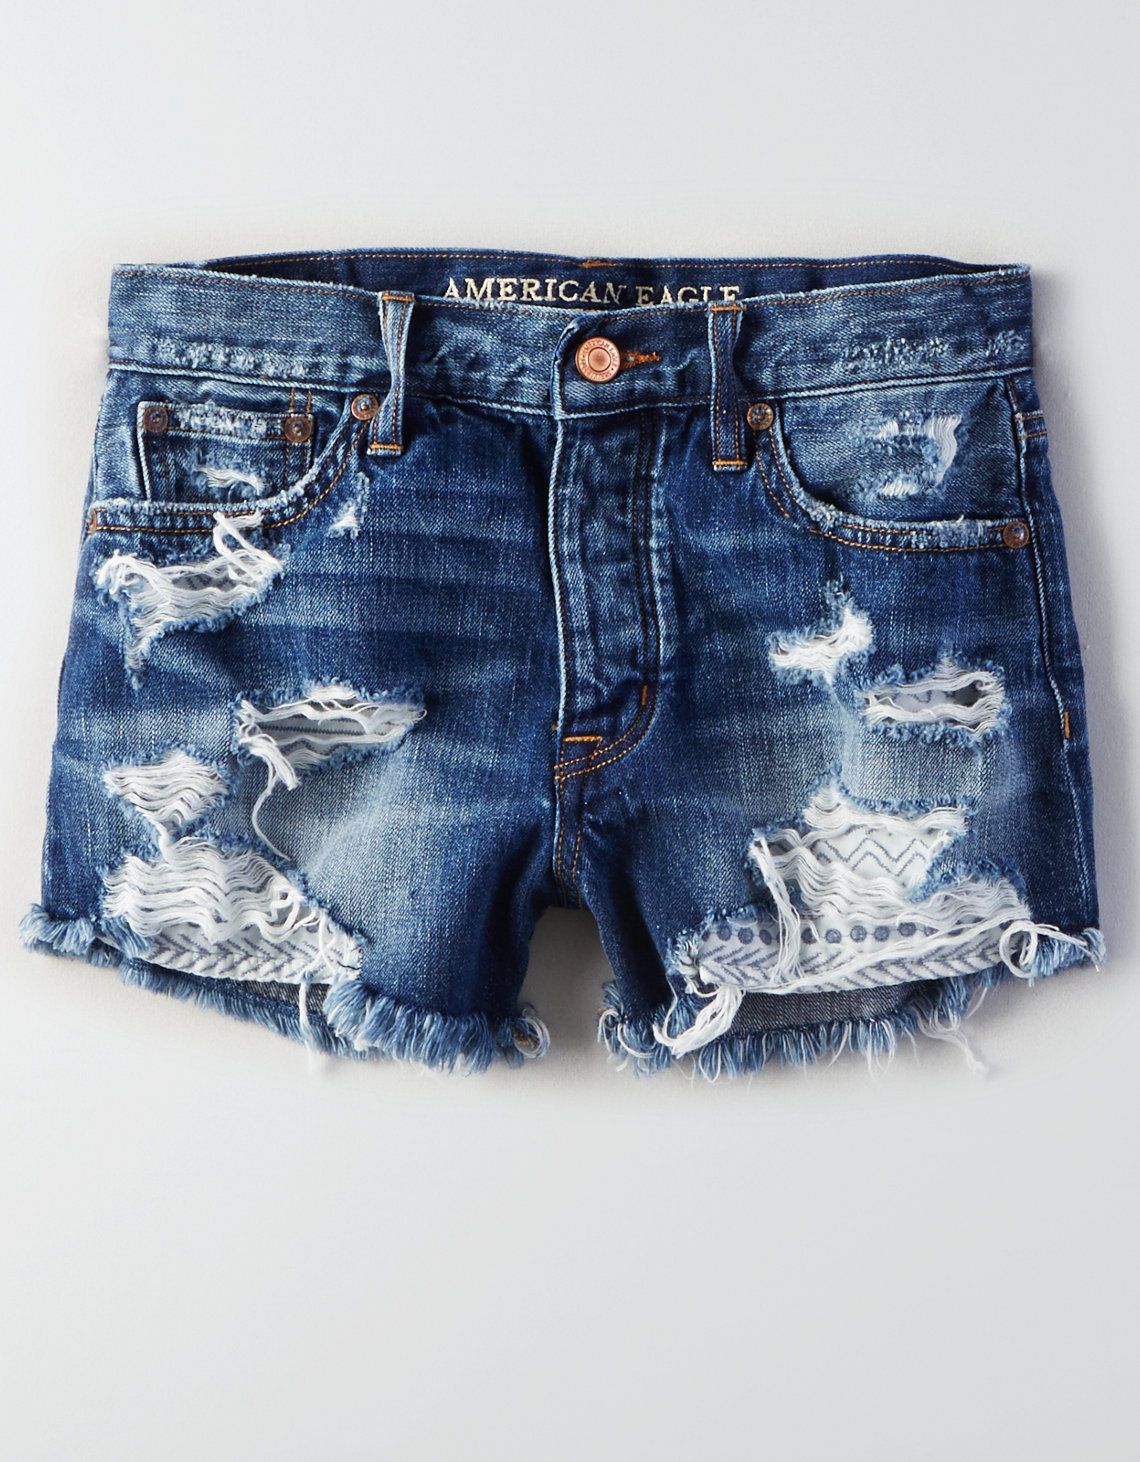 jean shorts with patches